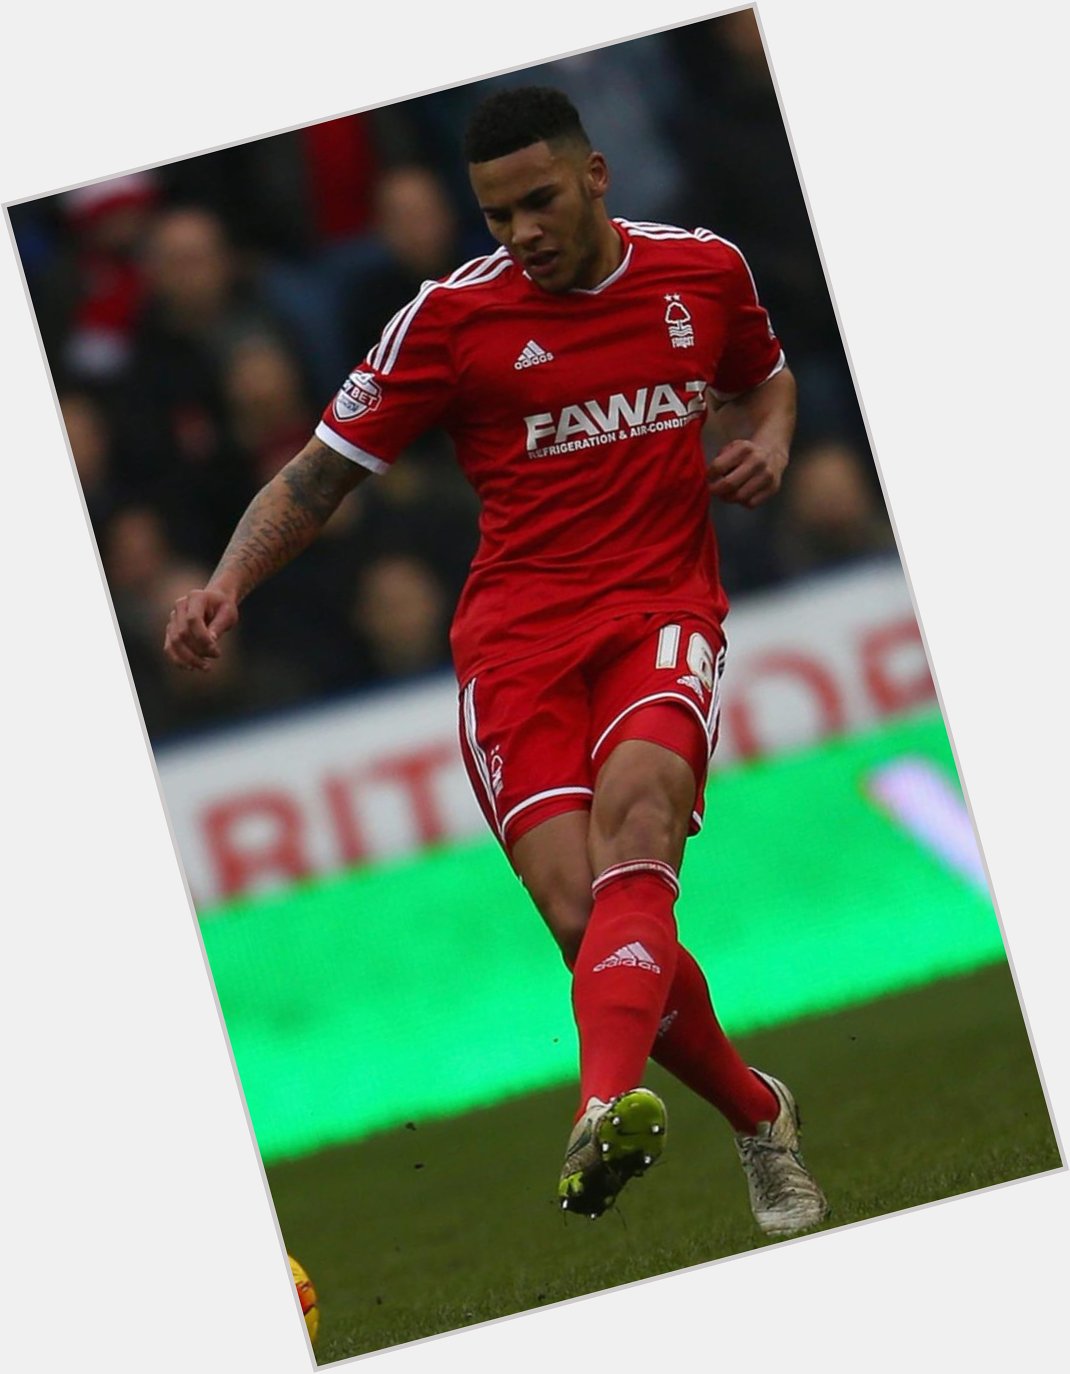 Happy birthday to former reds defender Jamaal lascelles 